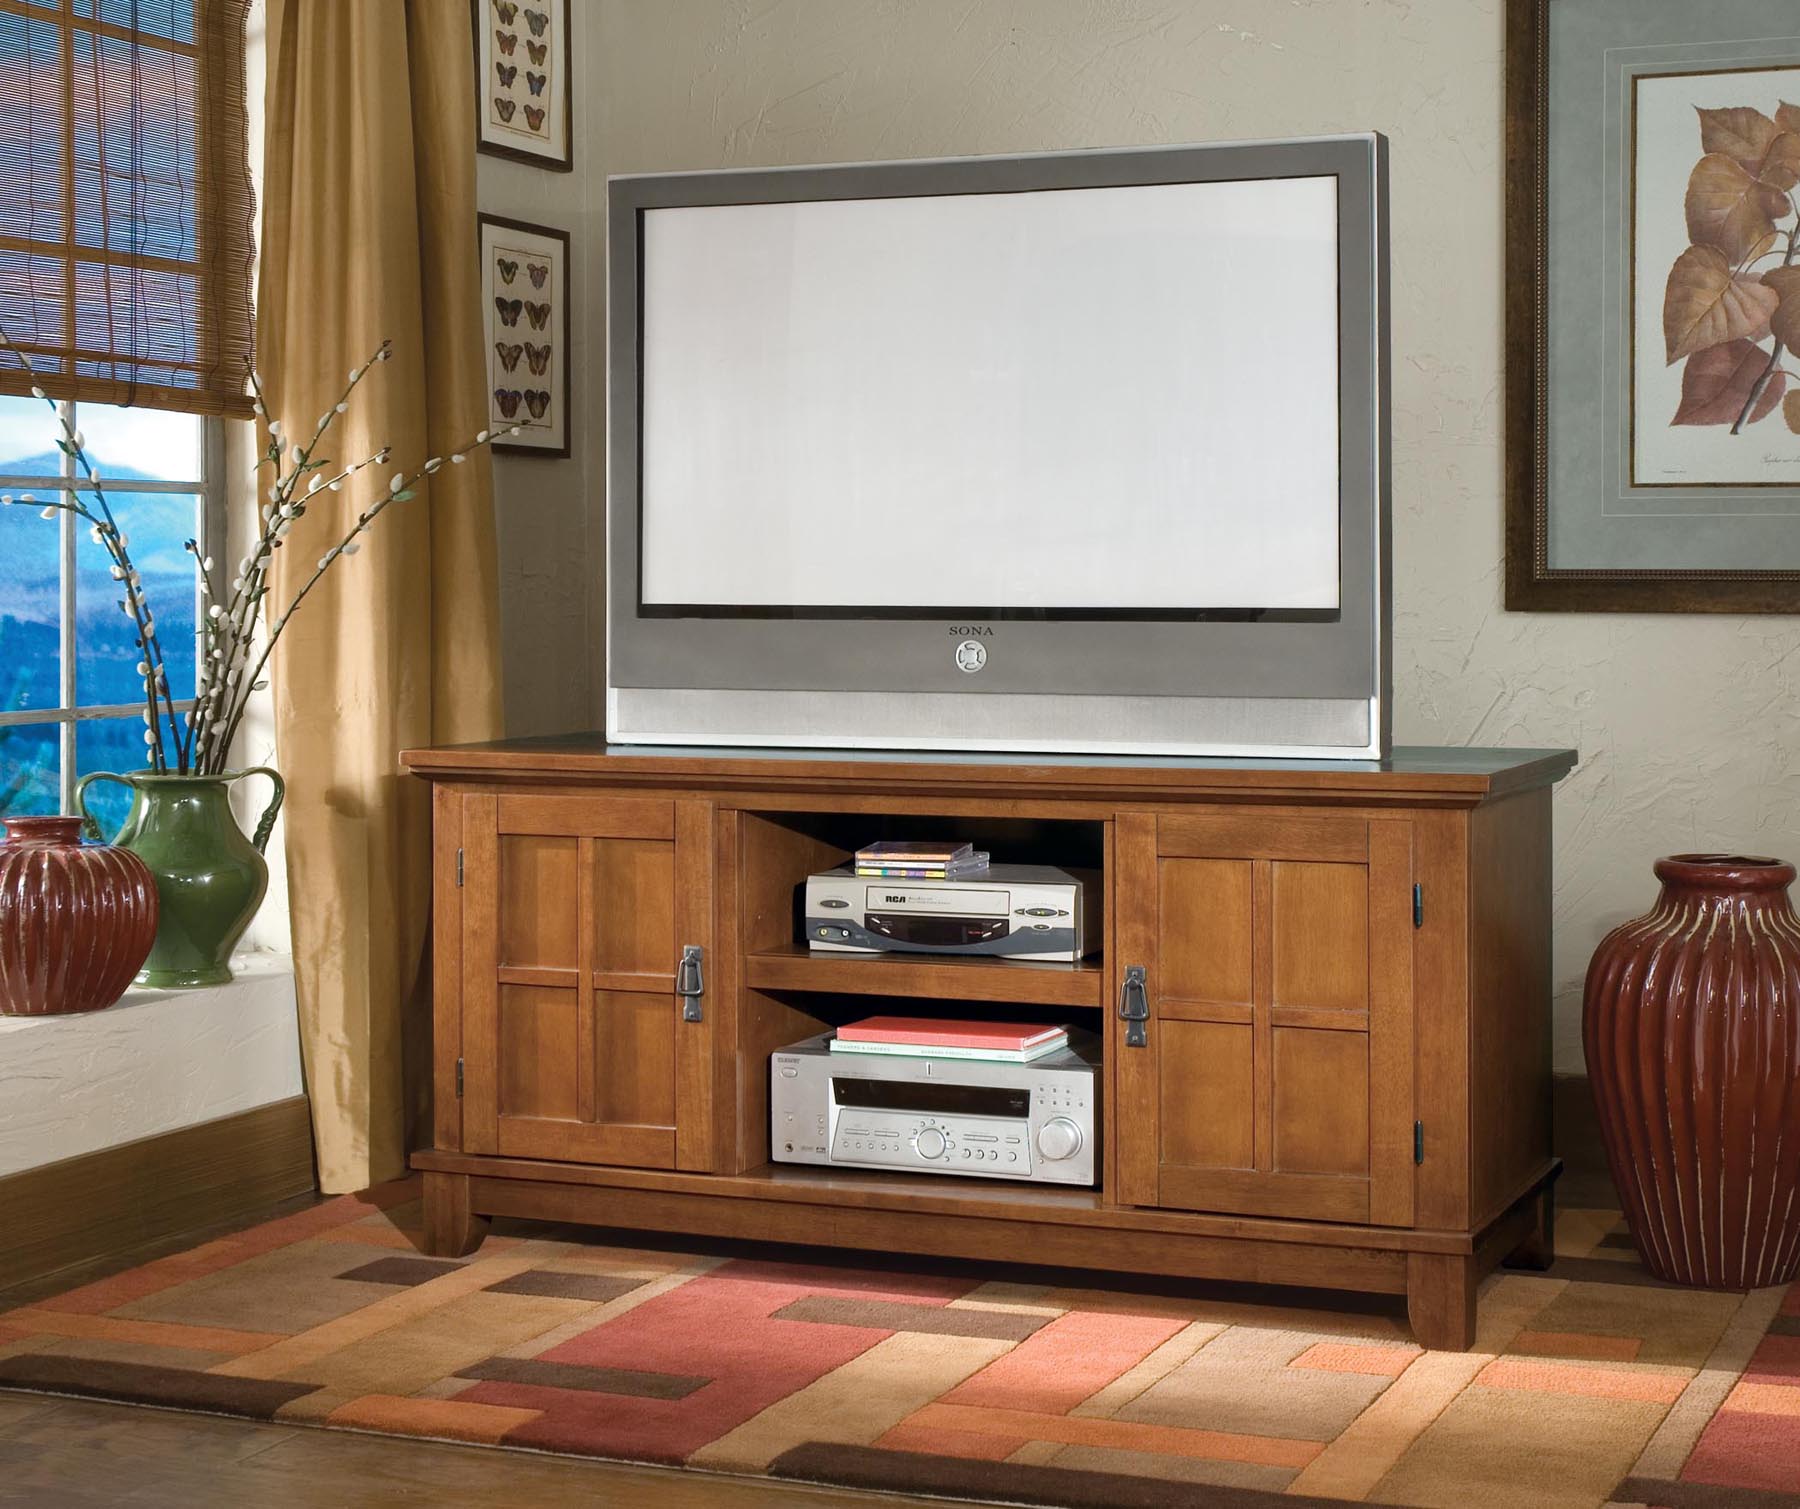 oak tv stand from the family handyman - woodworking talk